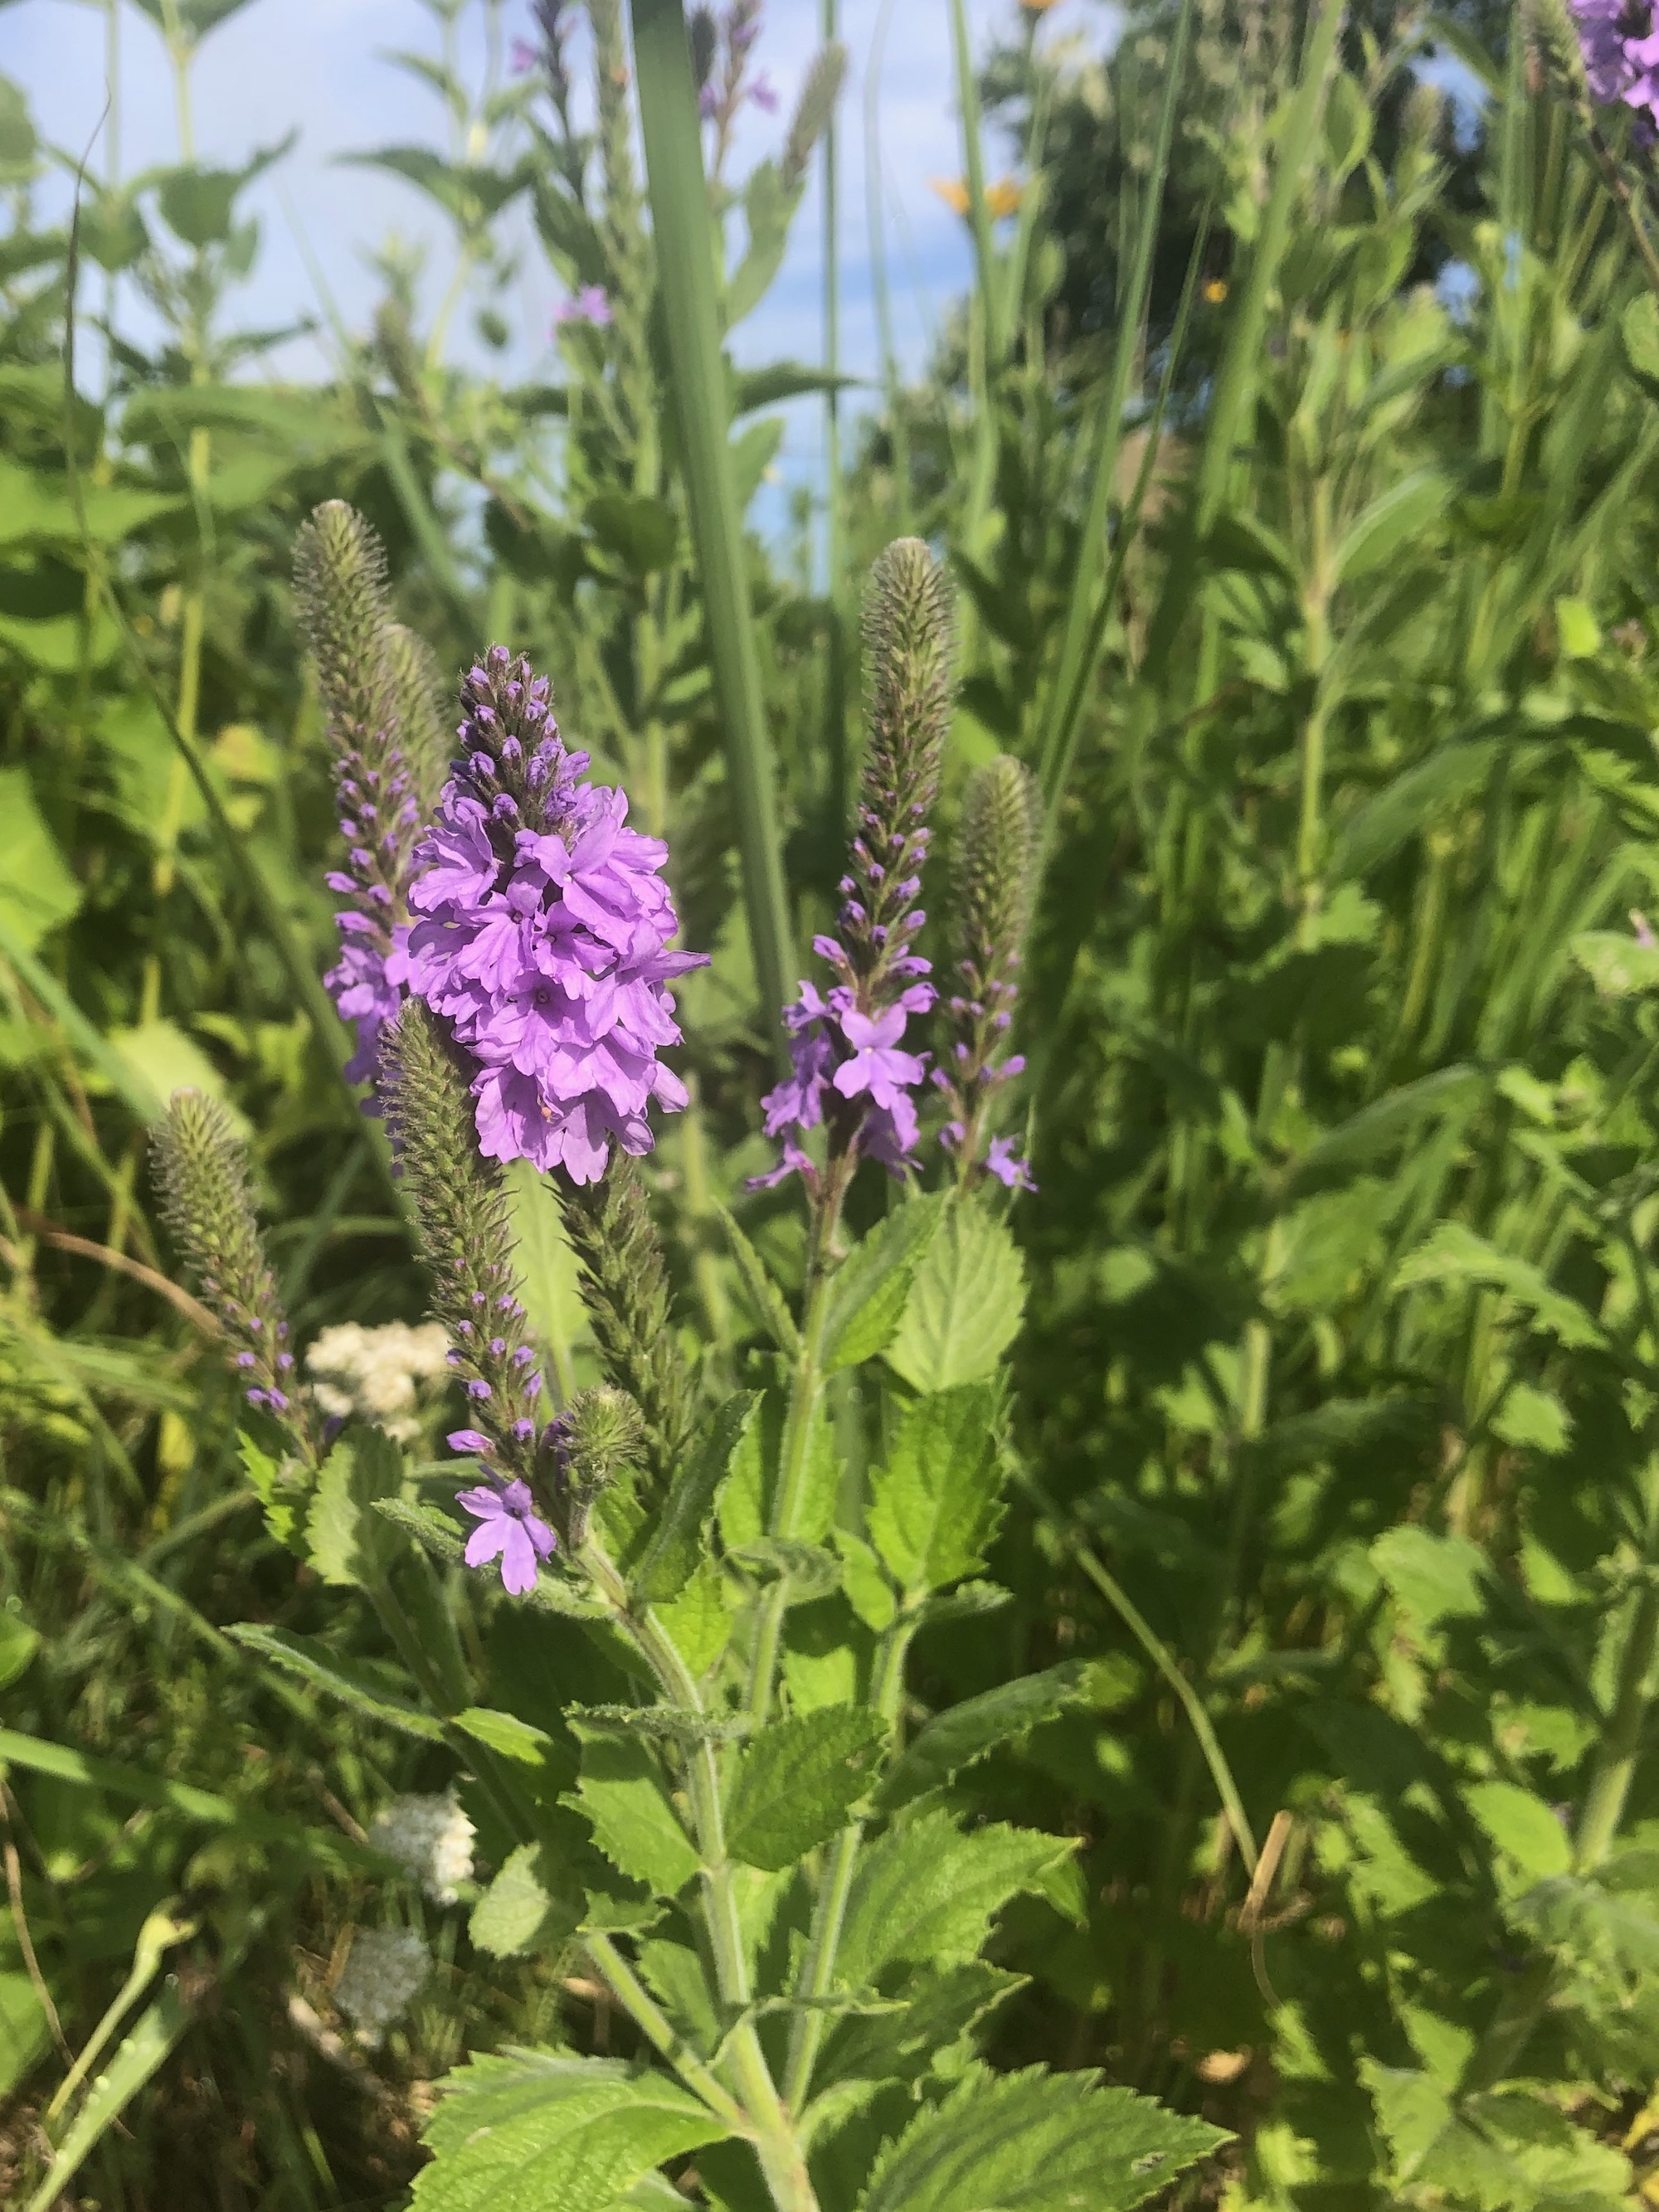 Hoary Vervain next to the UW Arboretum Visitors Center in Madison, Wisconsin on June 30, 2021.